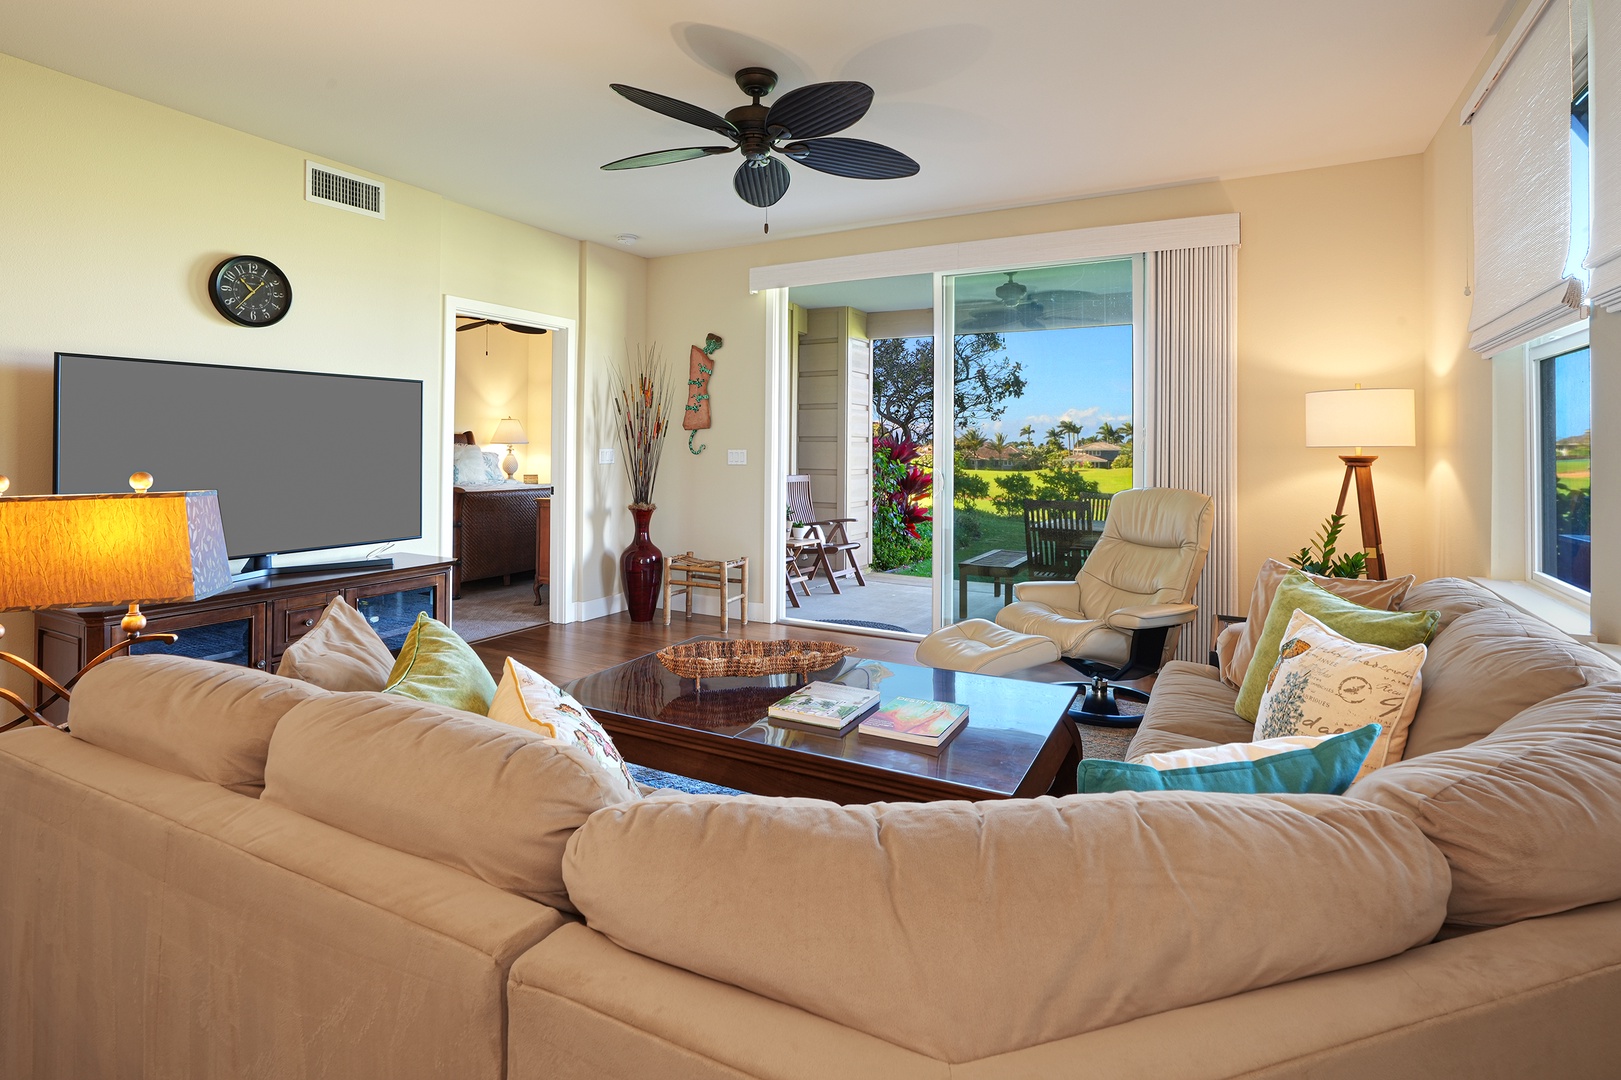 Koloa Vacation Rentals, Pili Mai 7J - The perfect comfortable sectional for movie night, or enjoying the tropical views.